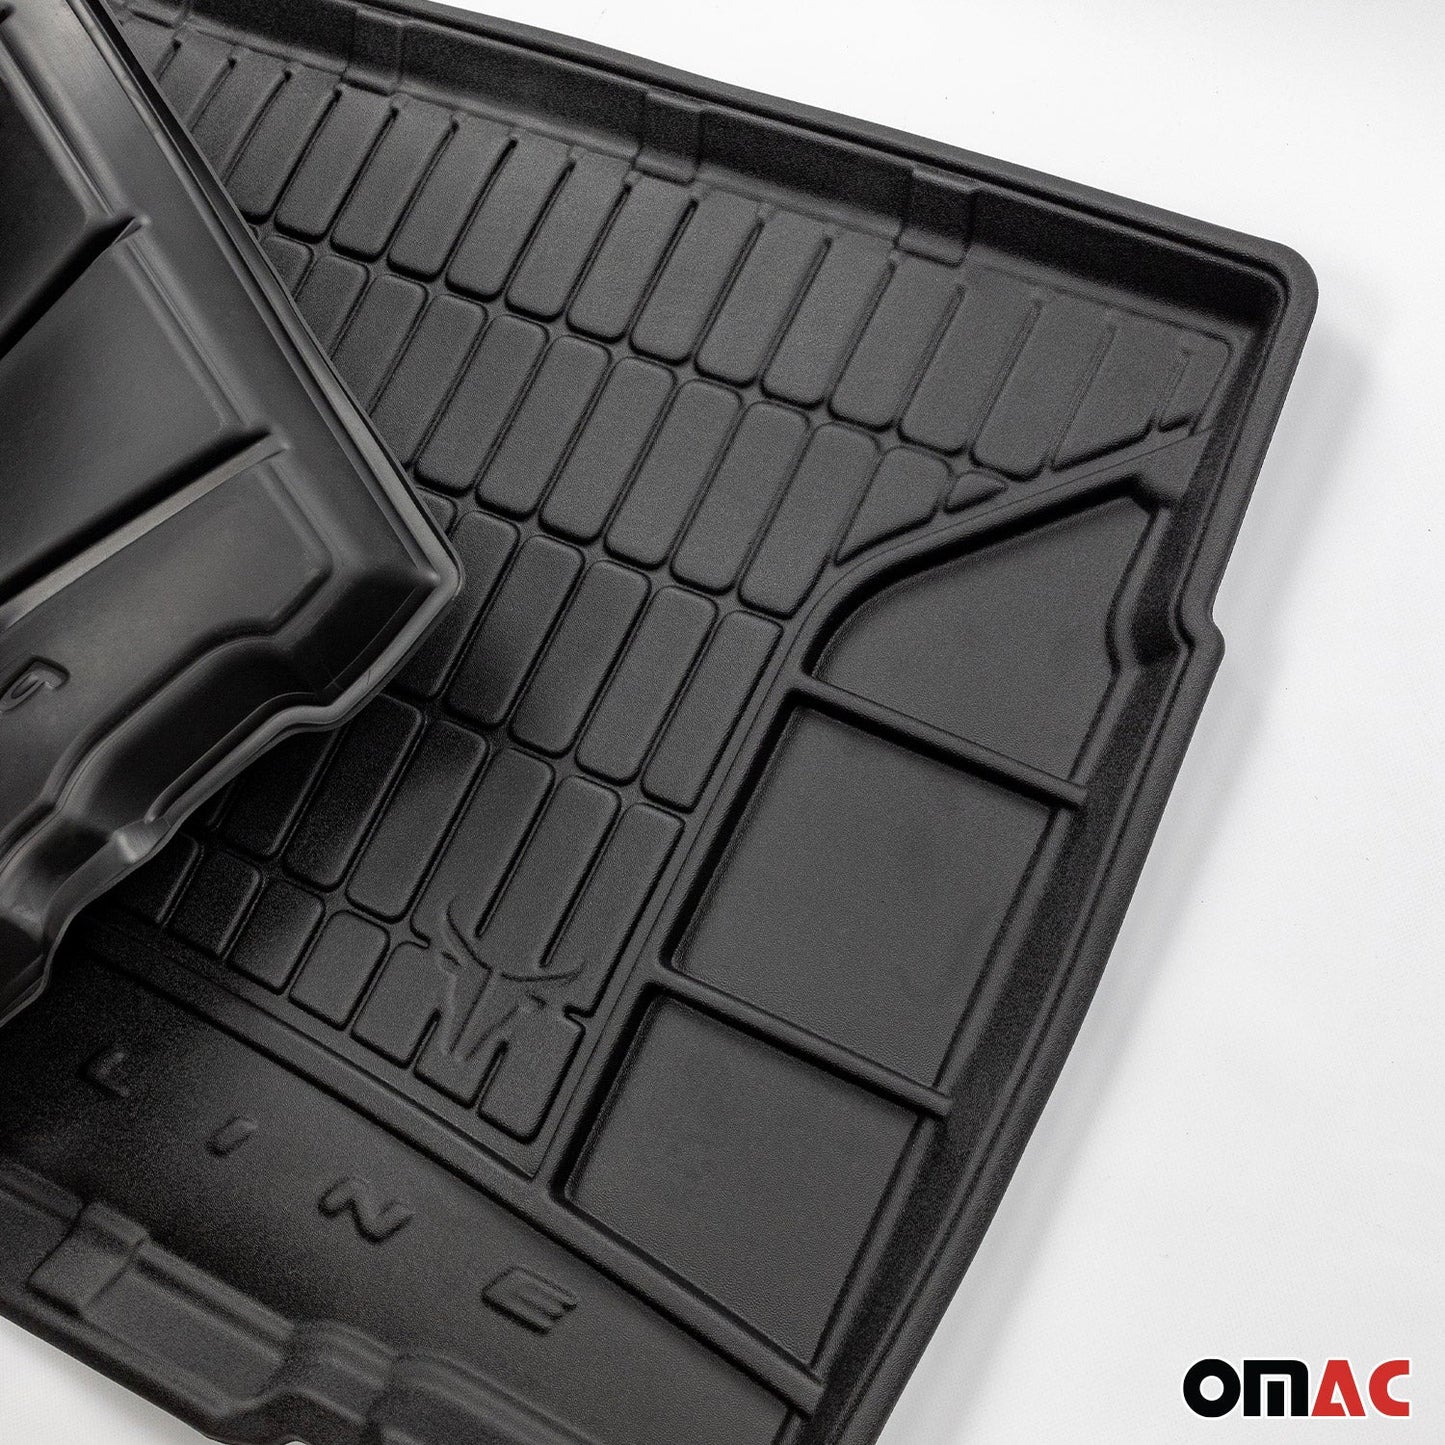 OMAC OMAC Premium Cargo Mats Liner for Mazda MX-30 2021-2023 Heavy Duty All-Weather '4634260